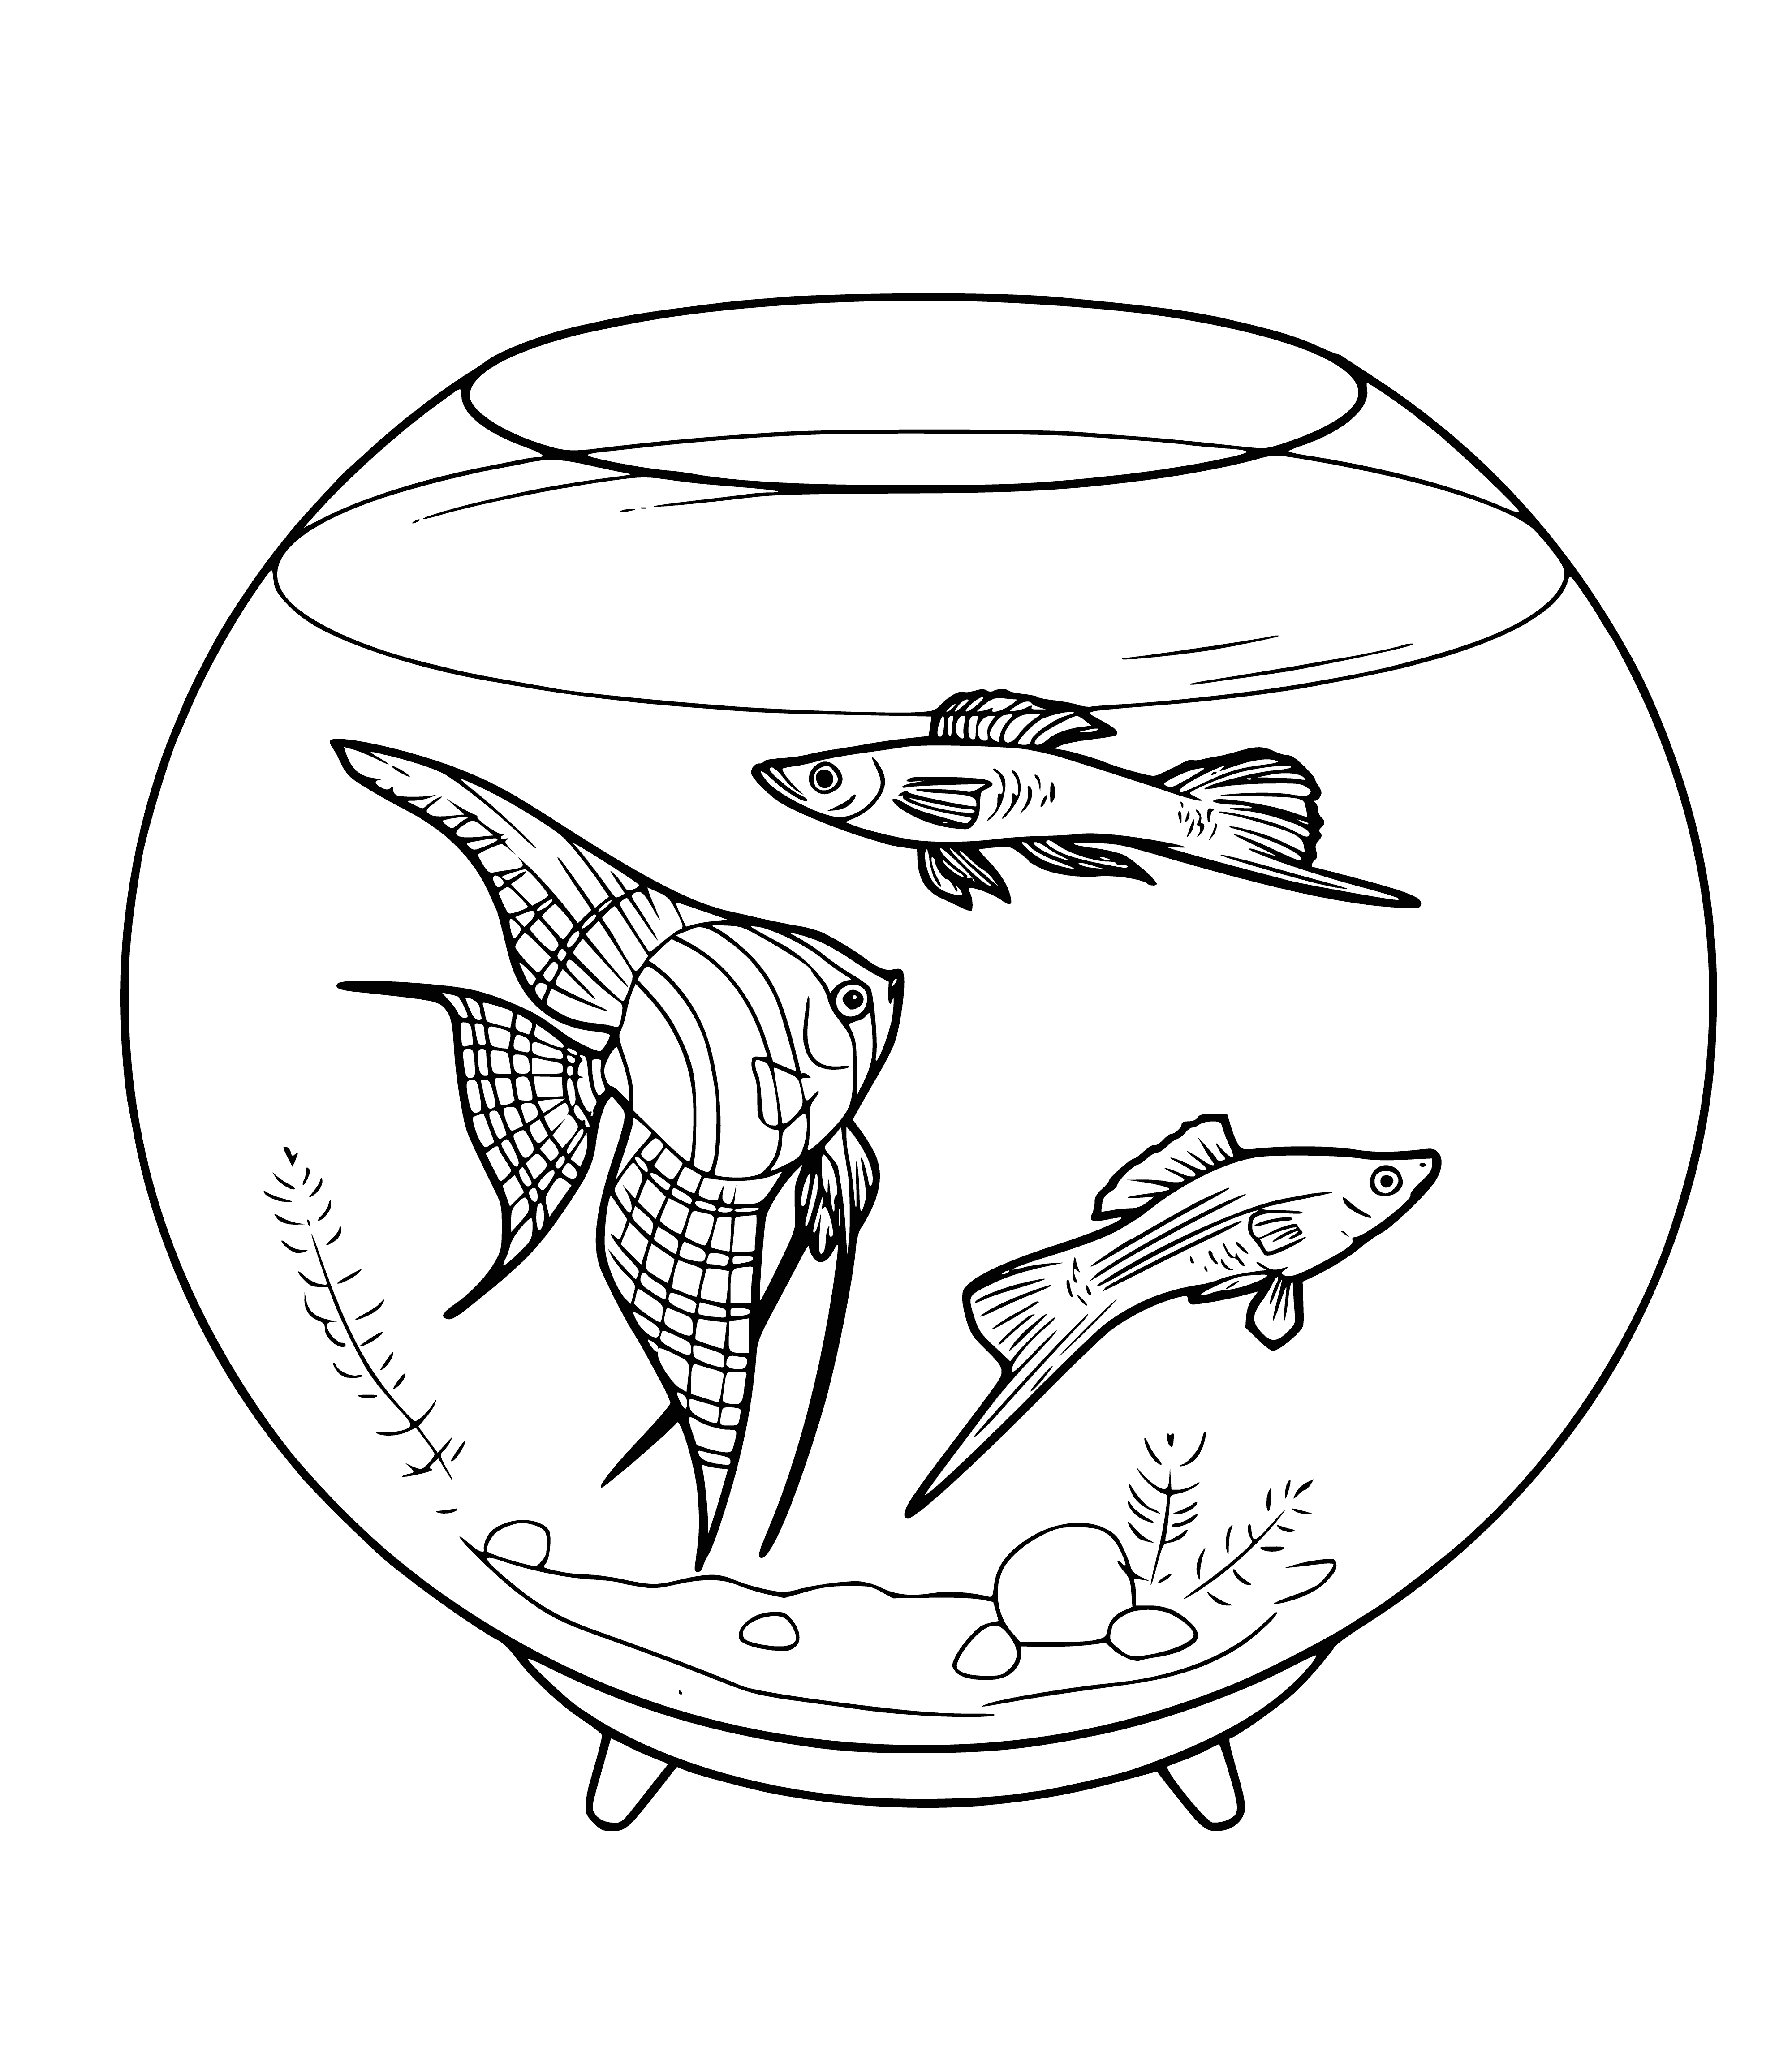 coloring page: Man admires the colorful fish & plants in an aquarium.